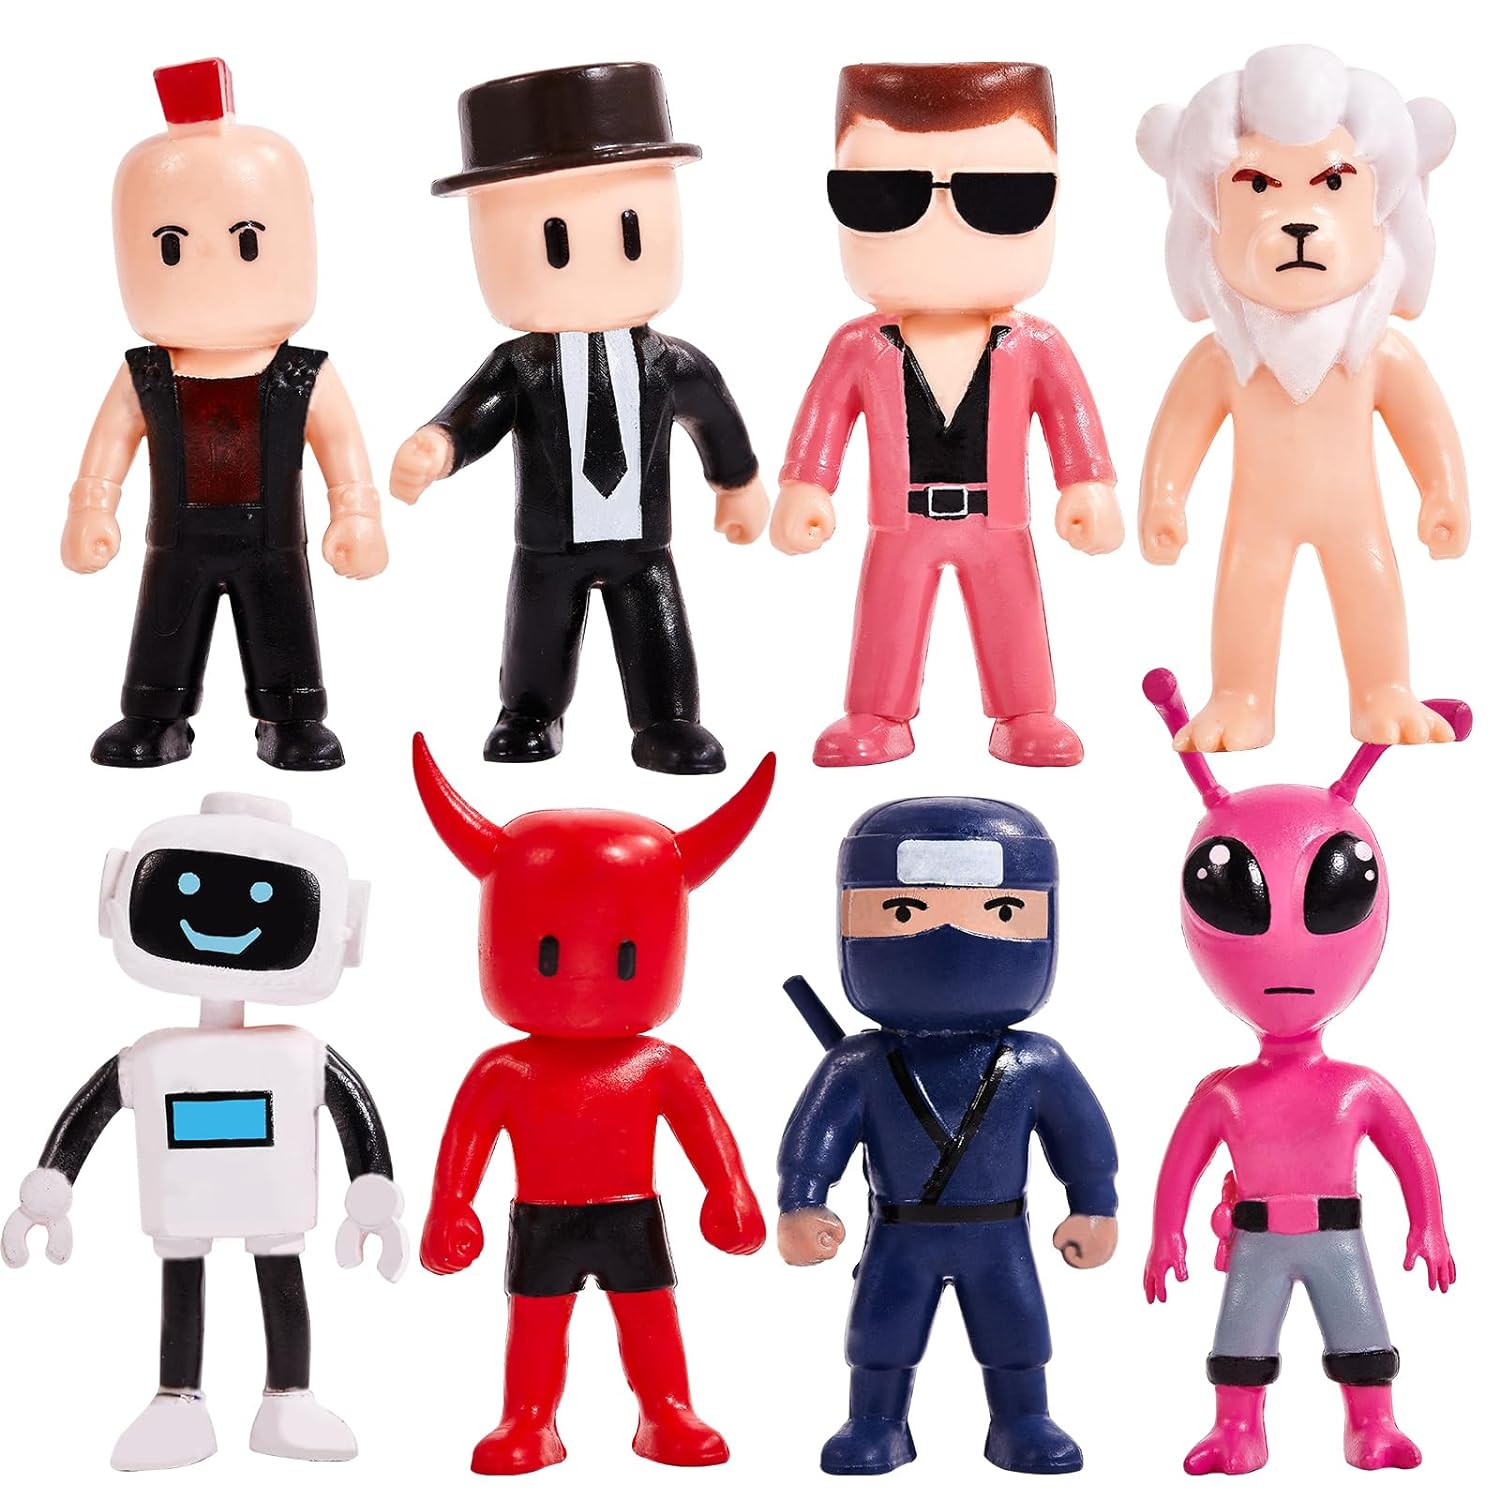 thinkstar Stumble Guys Toys, 8Pcs 2.6 Inches Pvc Stumble Guys Figures,  Character Figures For Collecting, Decorating And Playing